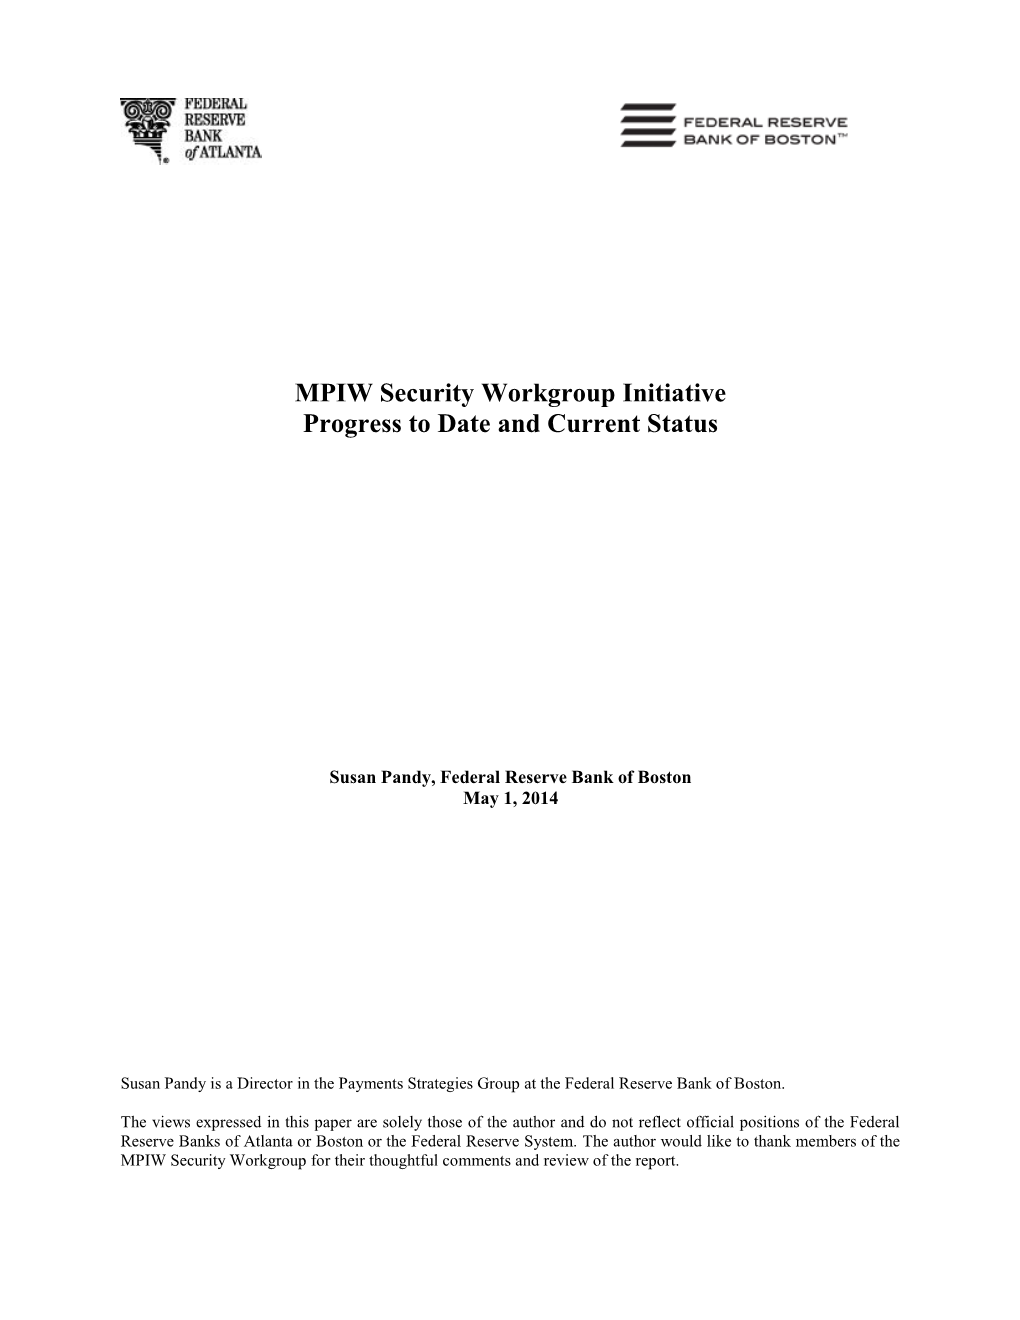 MPIW Security Workgroup Initiative Progress to Date and Current Status